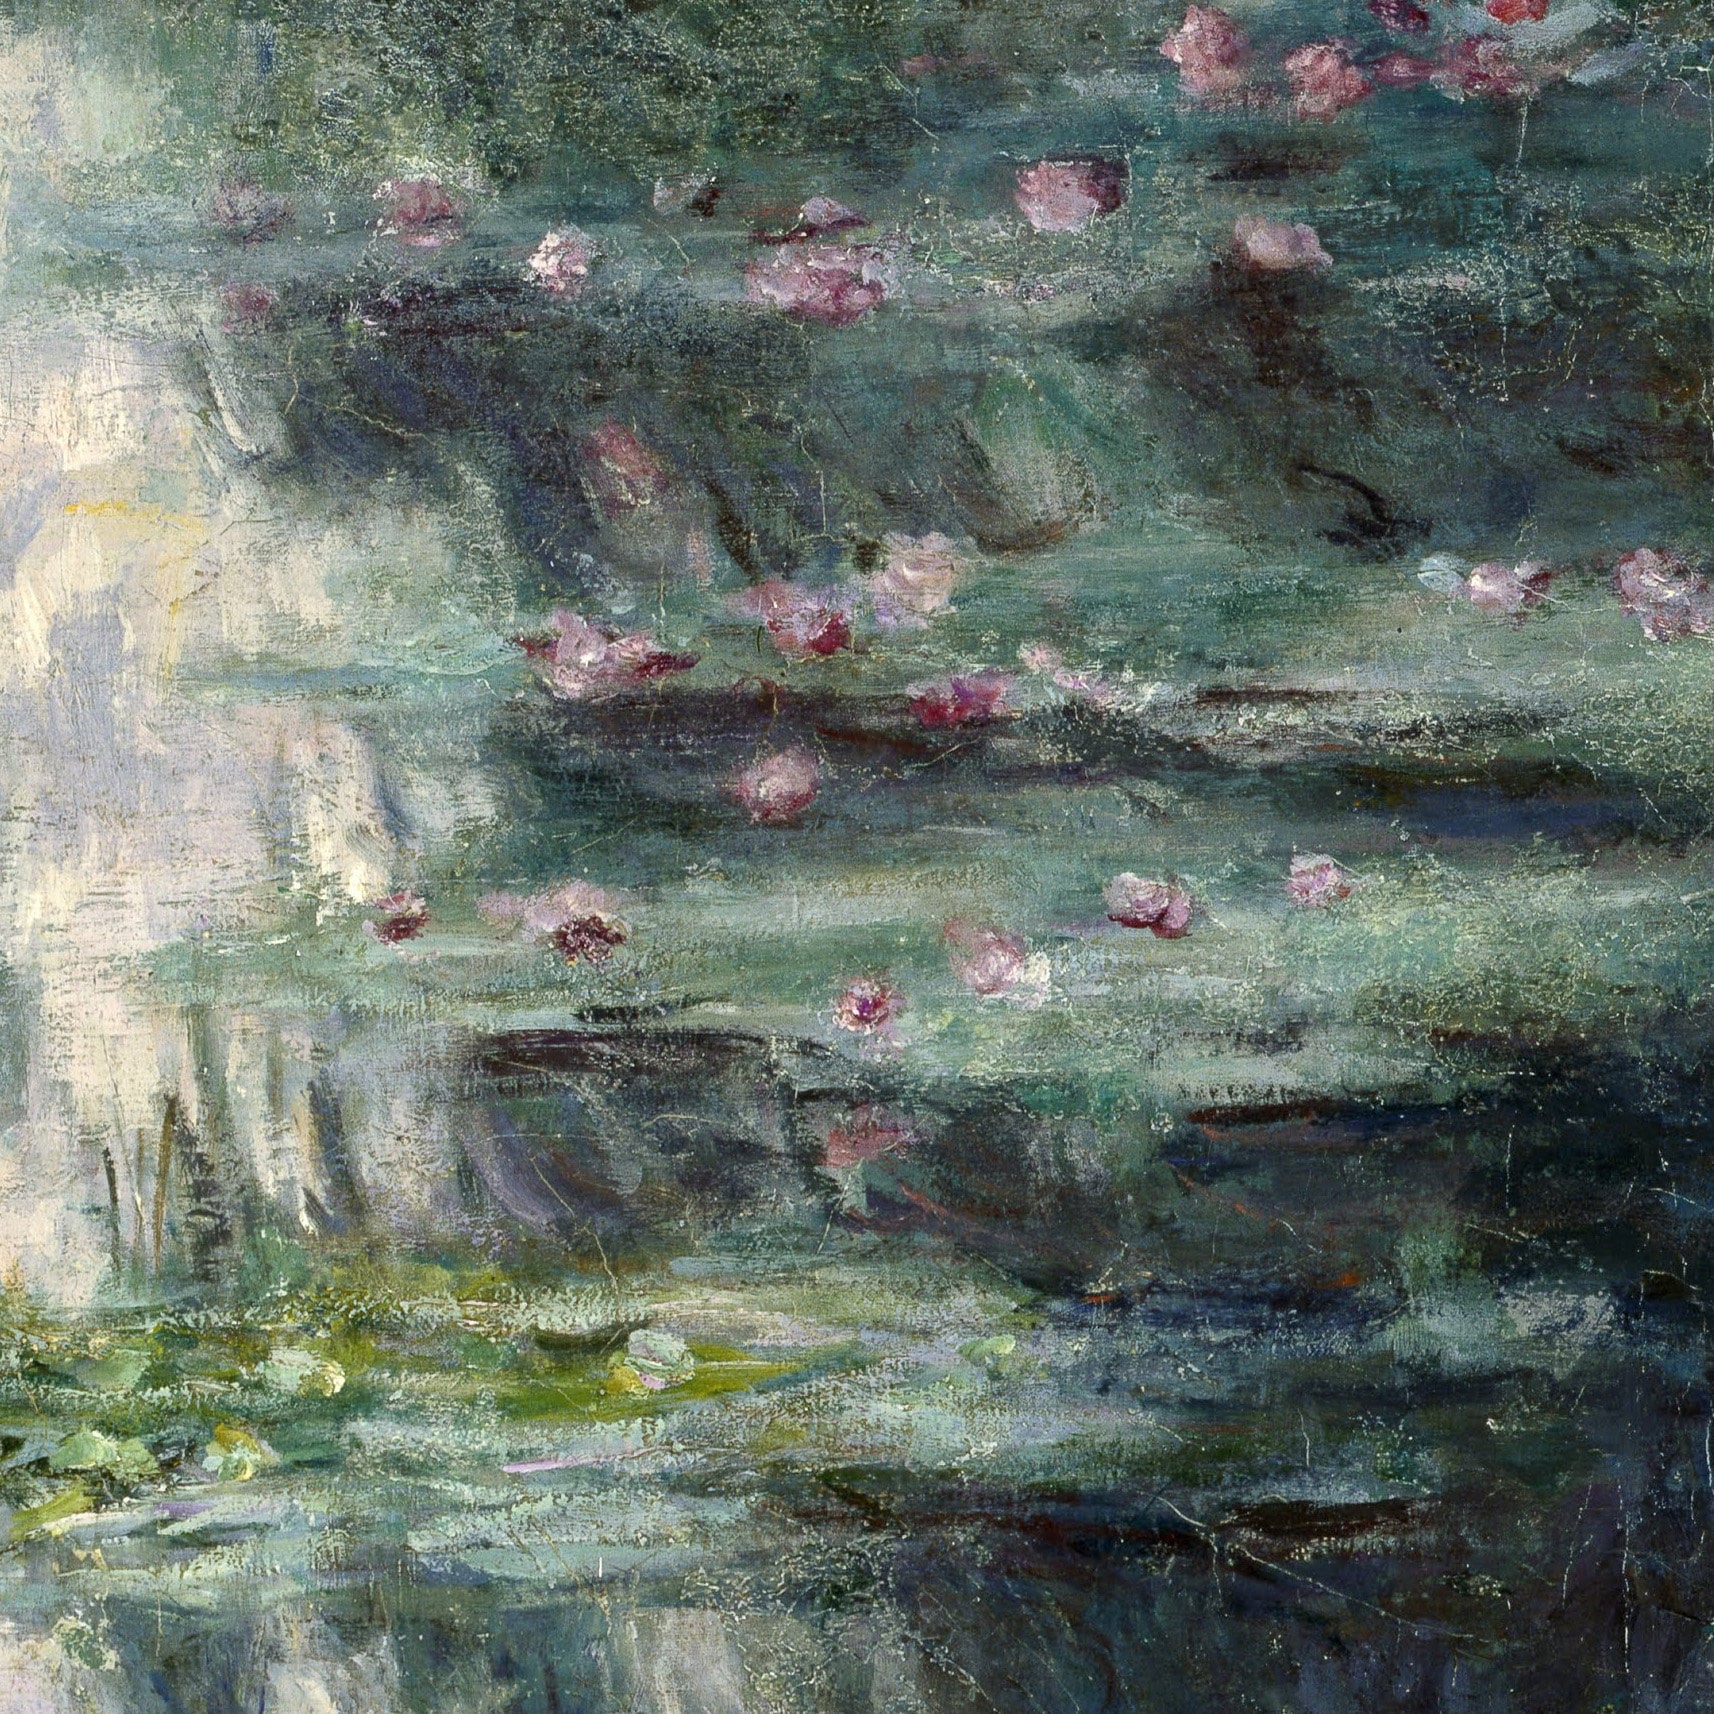 Pond with Water Lilies by Claude Monet, 3d Printed with texture and brush strokes looks like original oil-painting, code:008